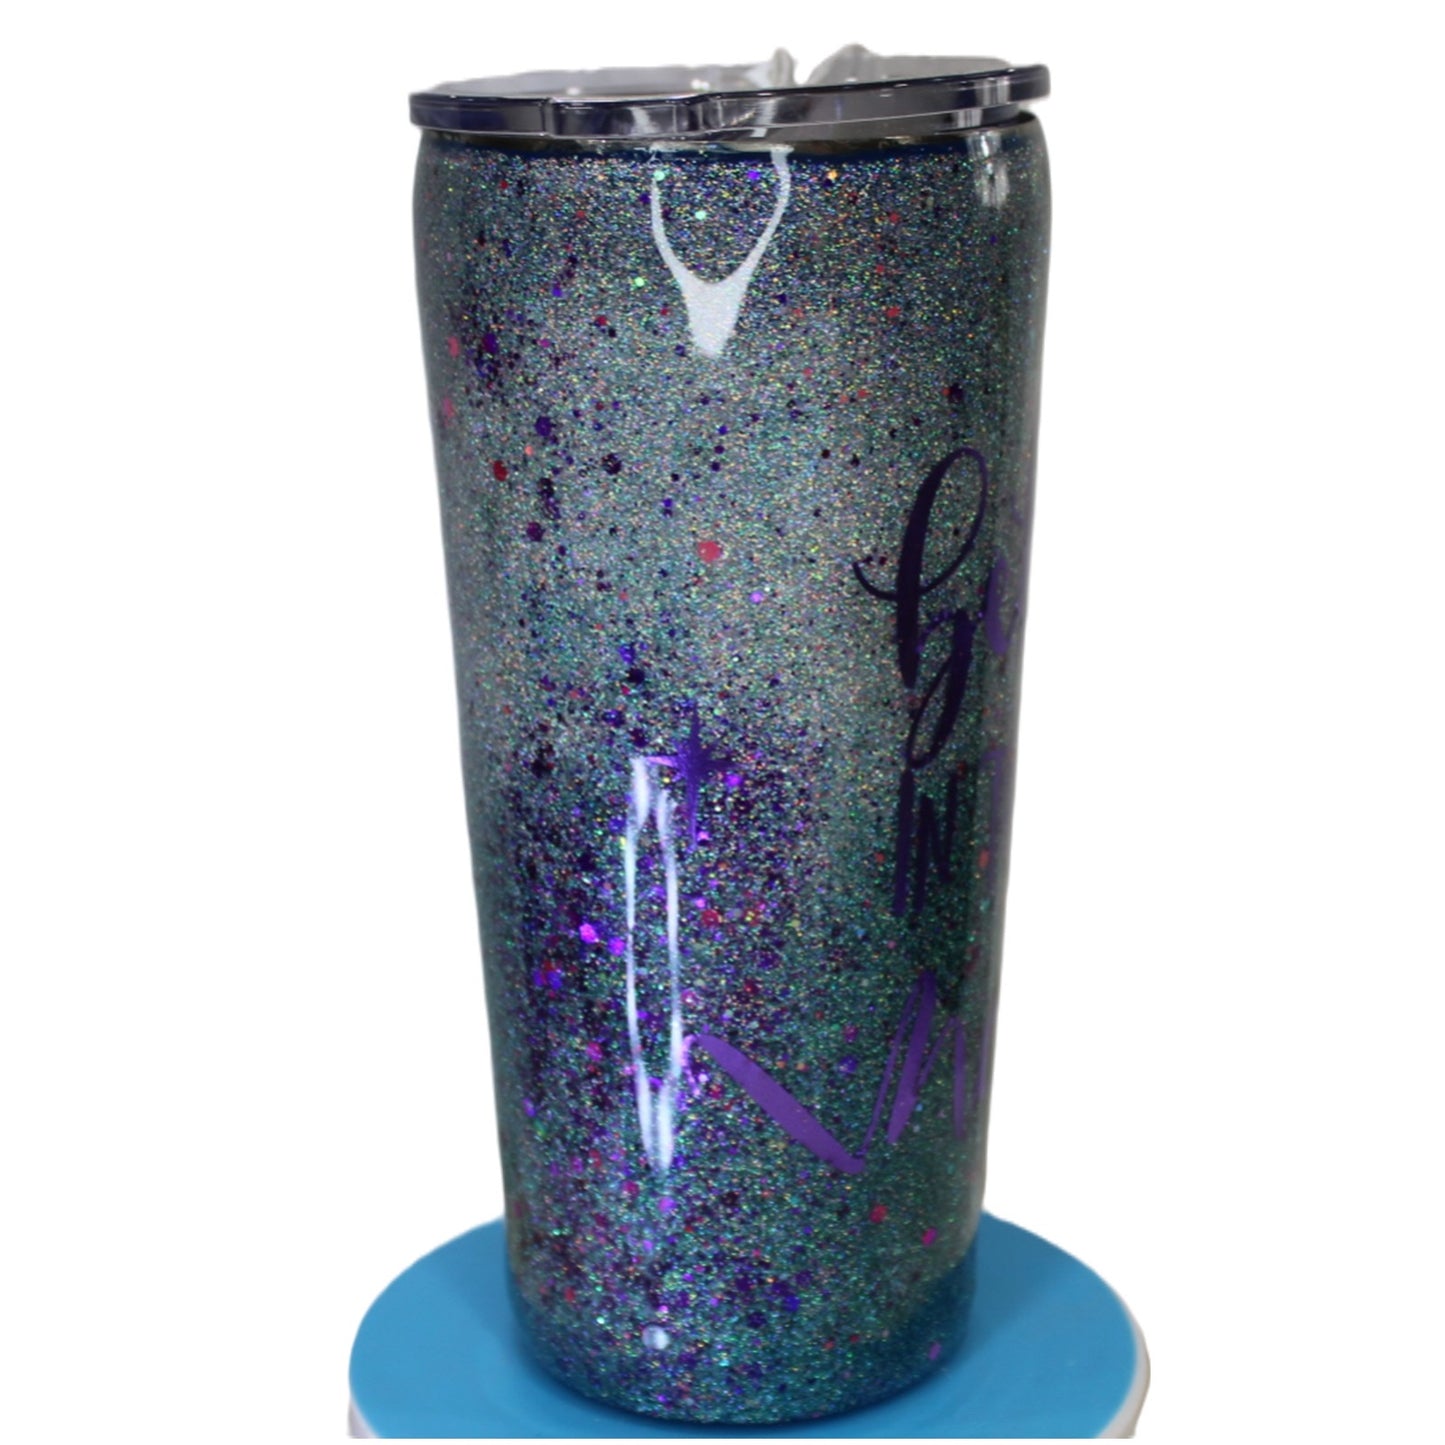 Tumbler Tapered Smooth 20 ounce with "Believe in the Magic" written on the side